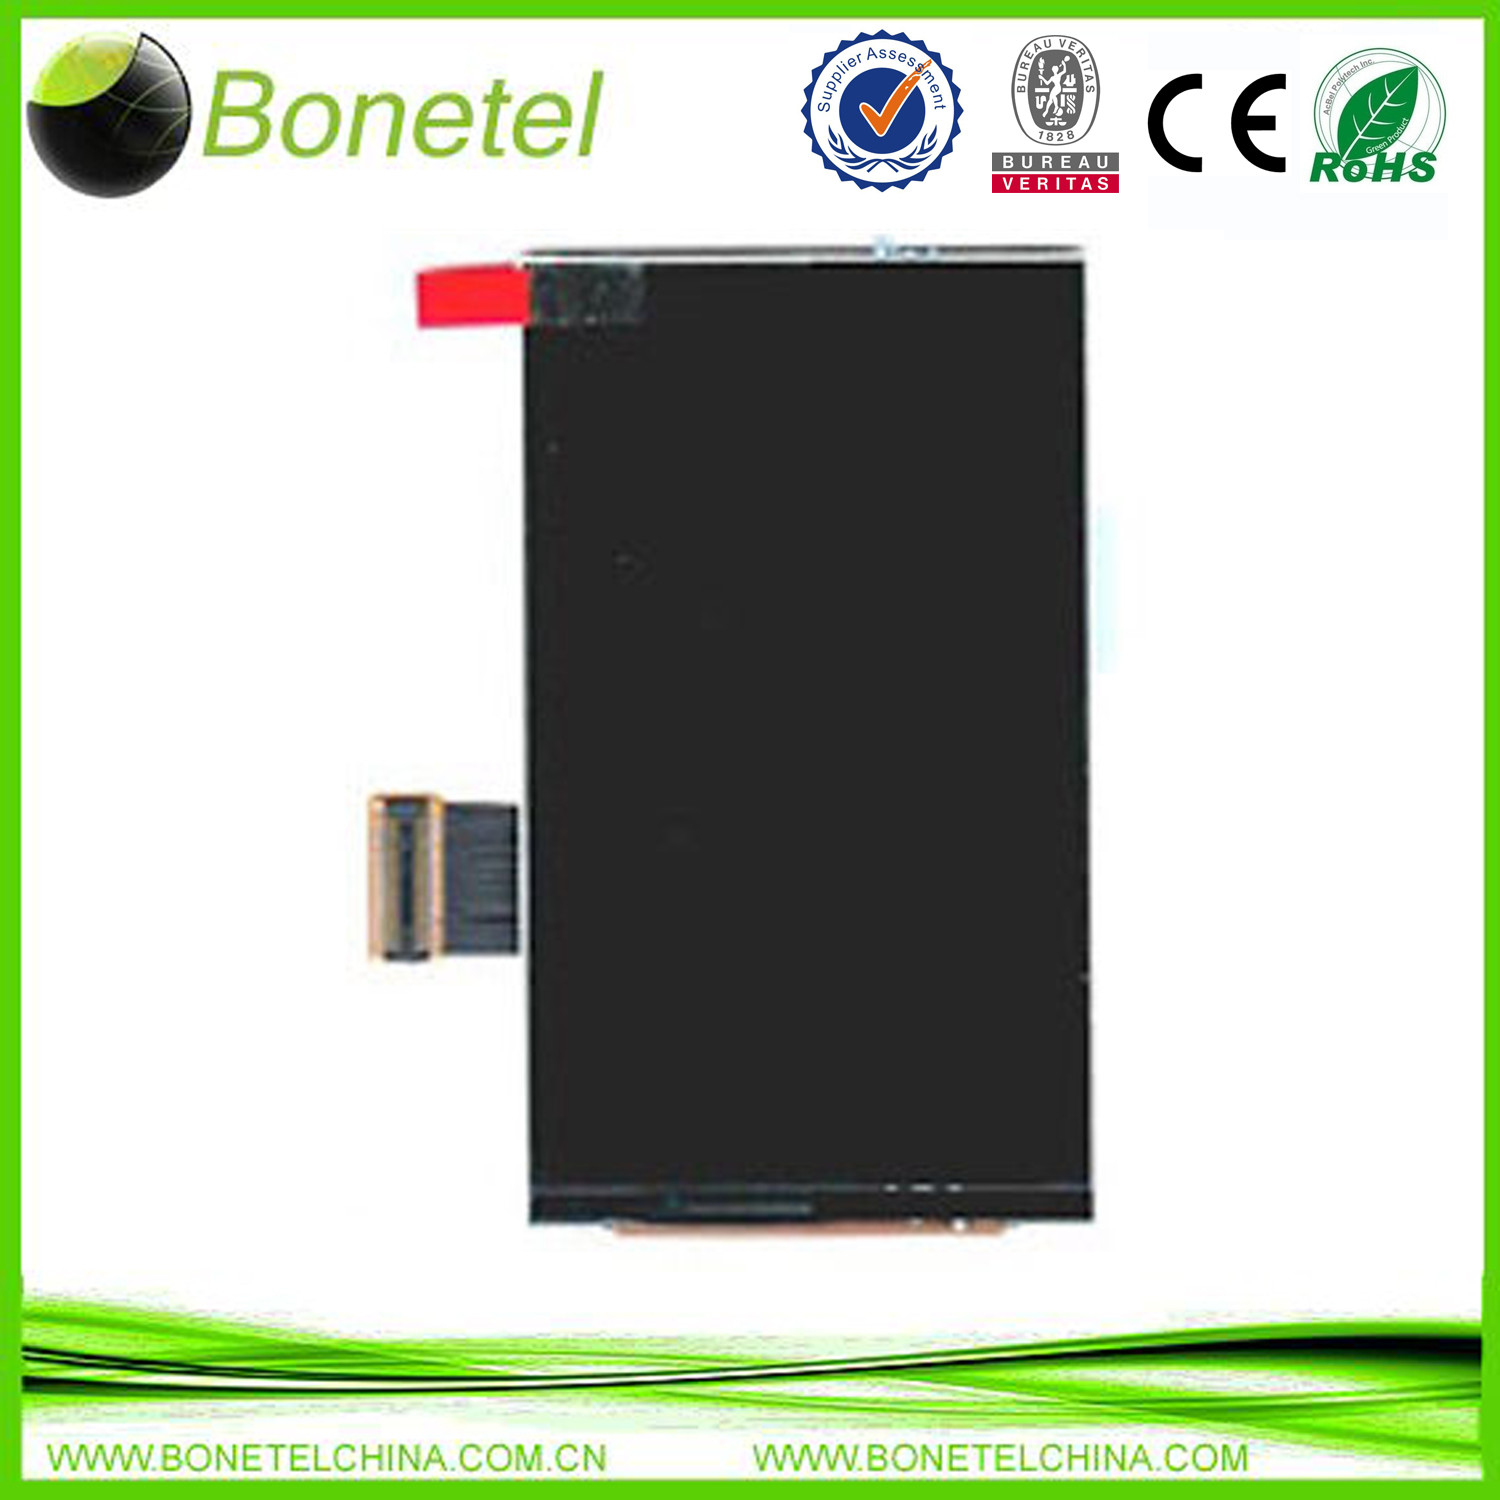 NEW REPLACEMENT LCD SCREEN DISPLAY FOR Samsung GT i8320 Vodafone 360 H1